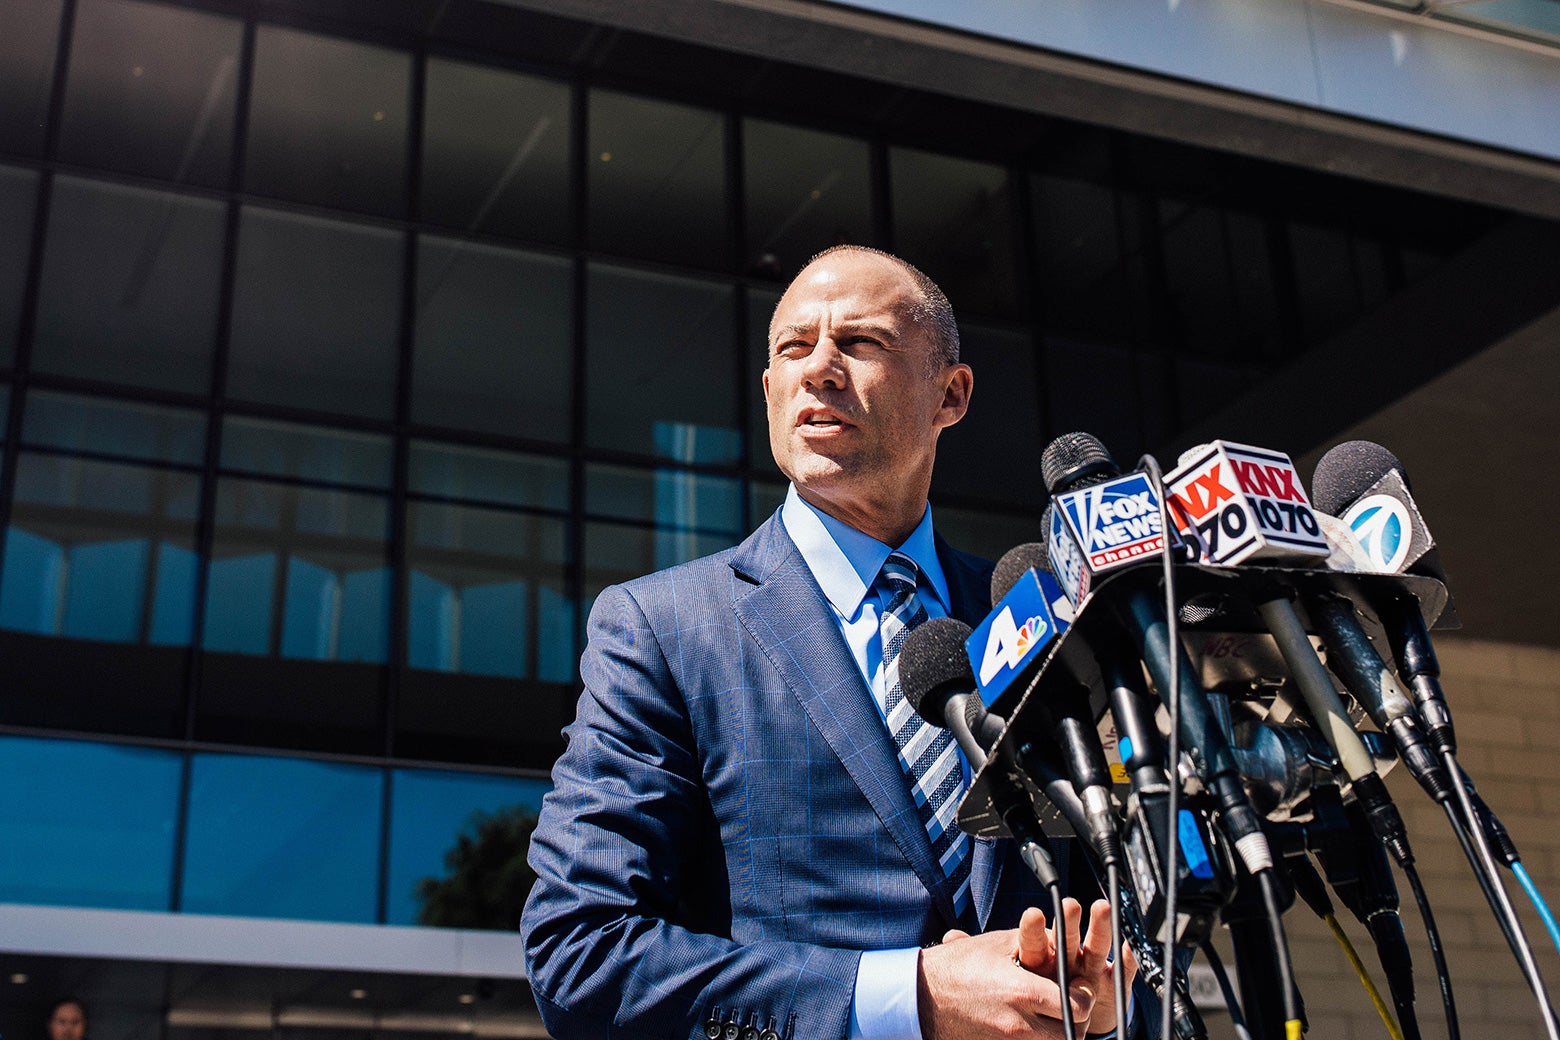 Michael Avenatti speaks to media in front of a Los Angeles courthouse.